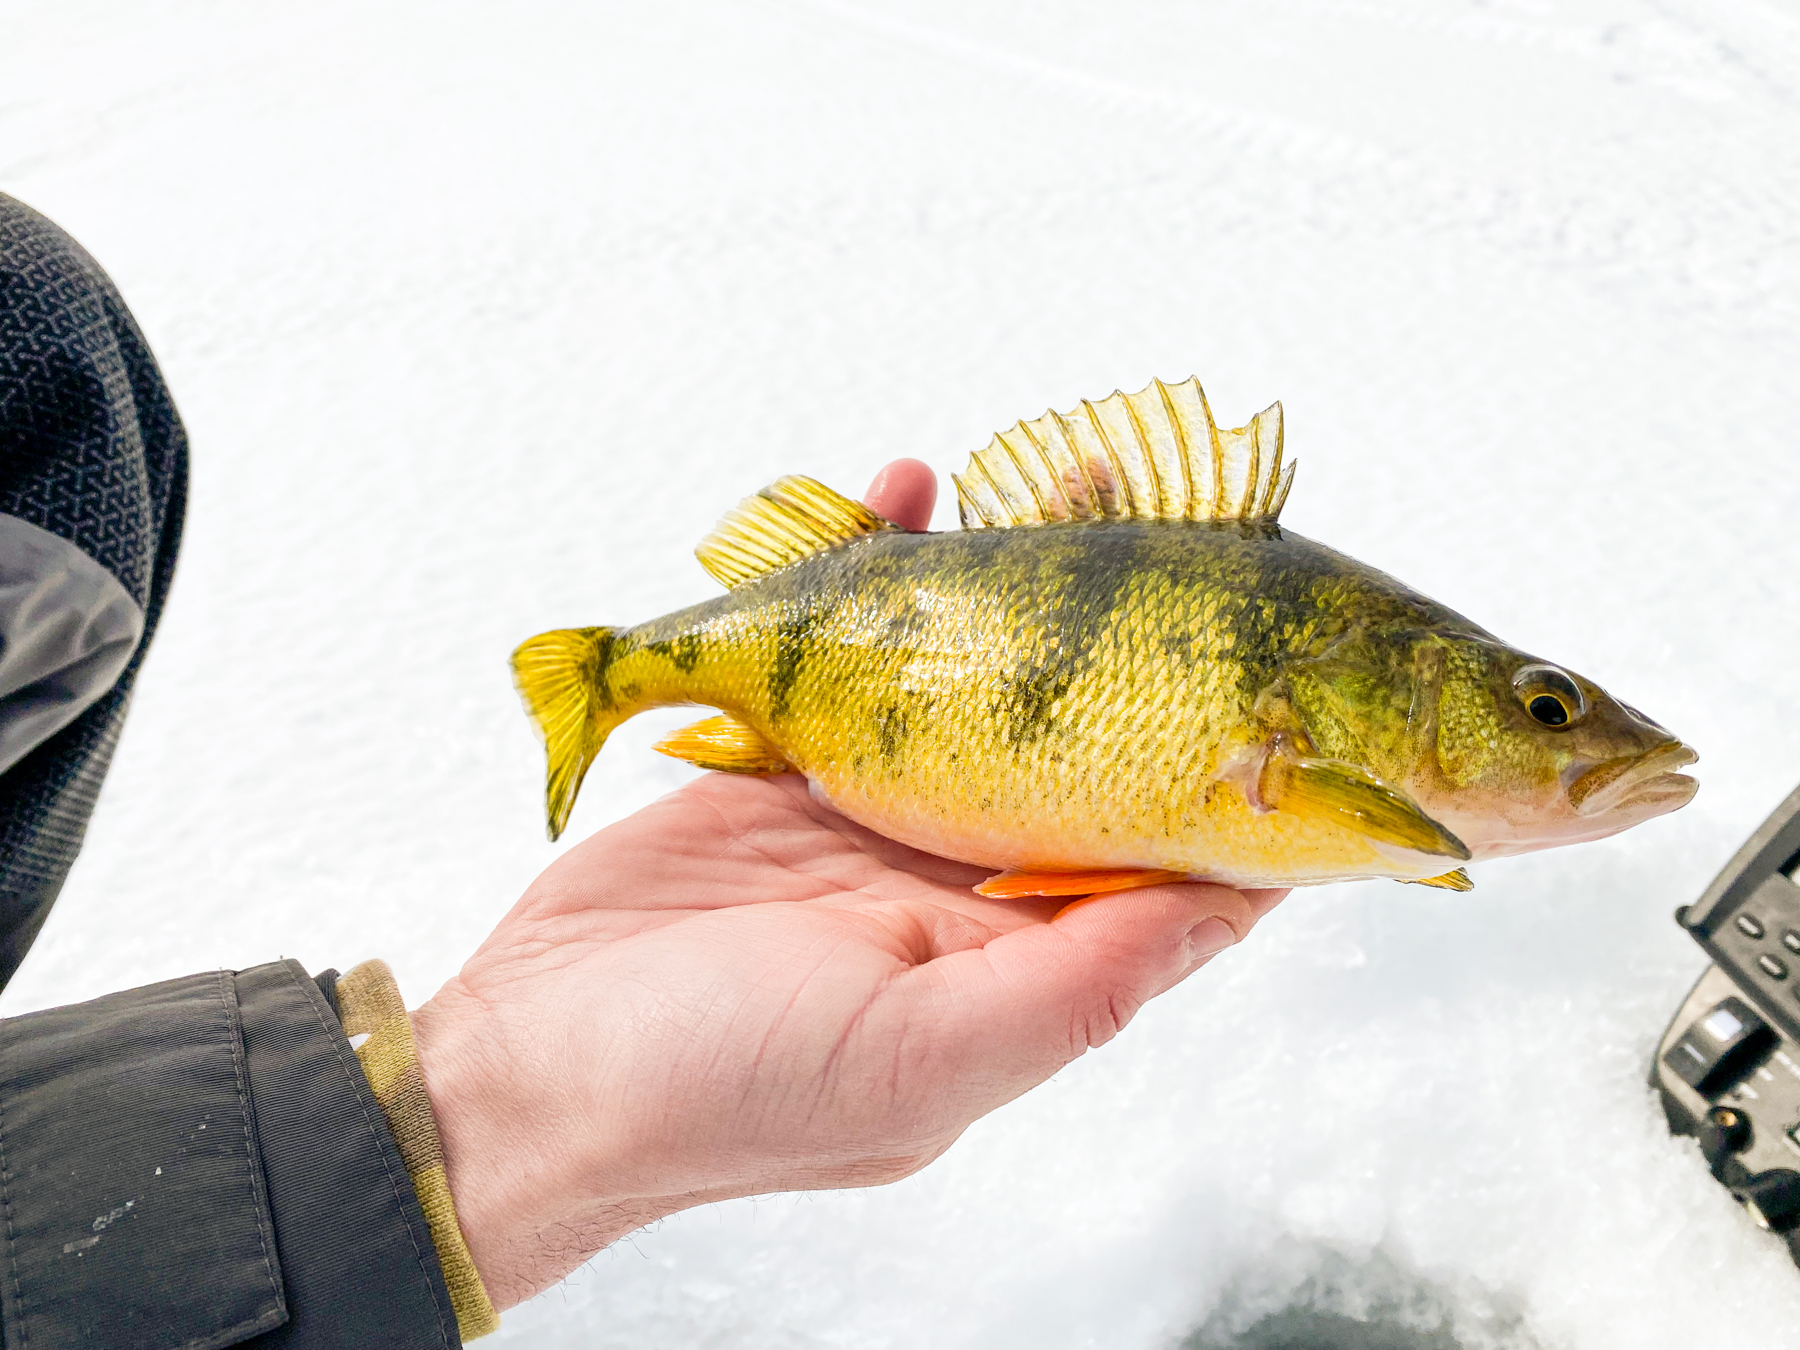 In deep with perch bites - Ontario OUT of DOORS